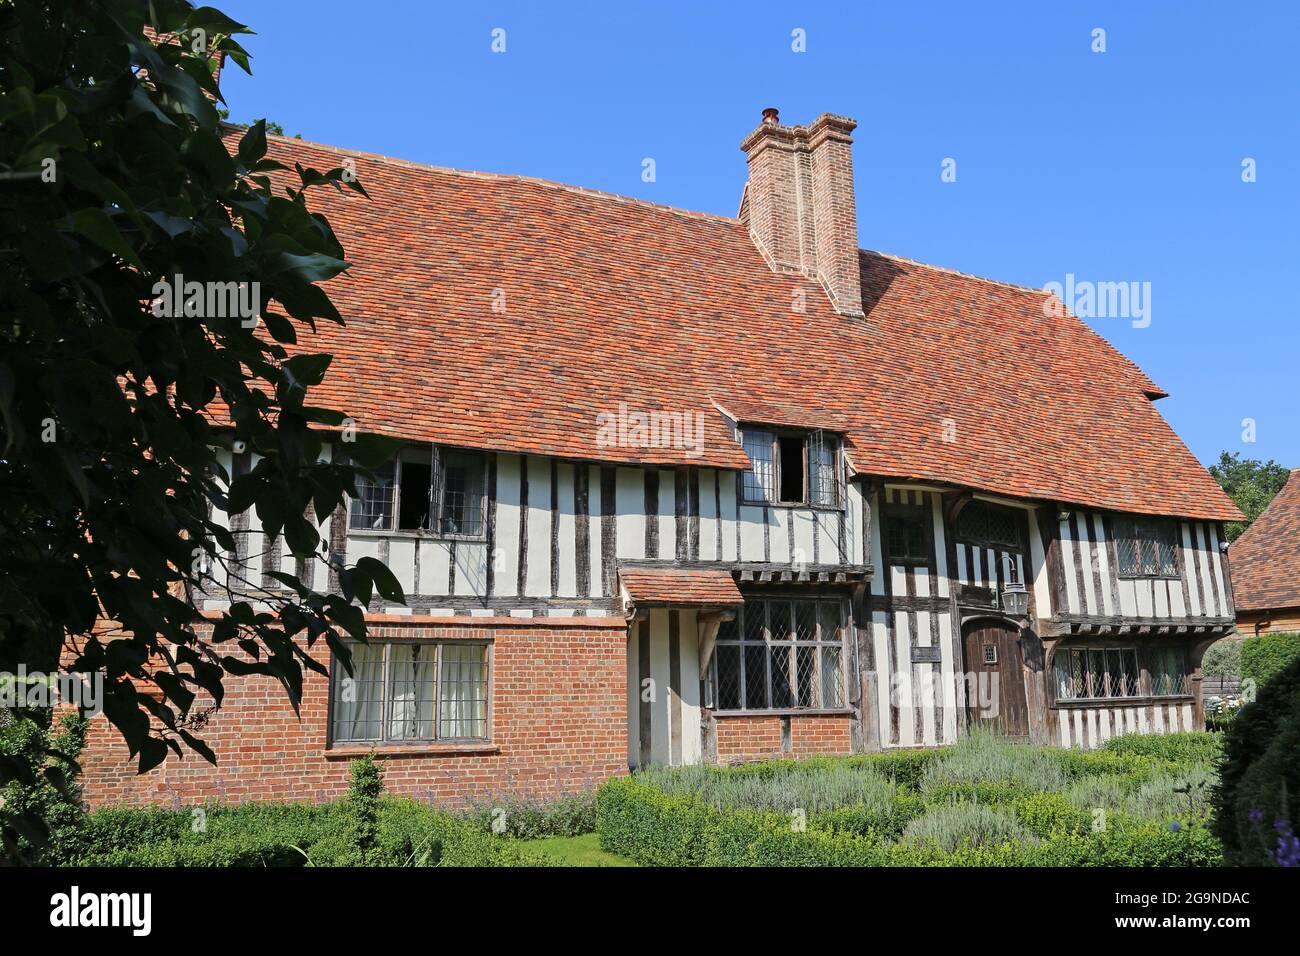 Cloth Hall, Water Lane, Smarden, Kent, Angleterre, Grande-Bretagne, Royaume-Uni, Europe Banque D'Images